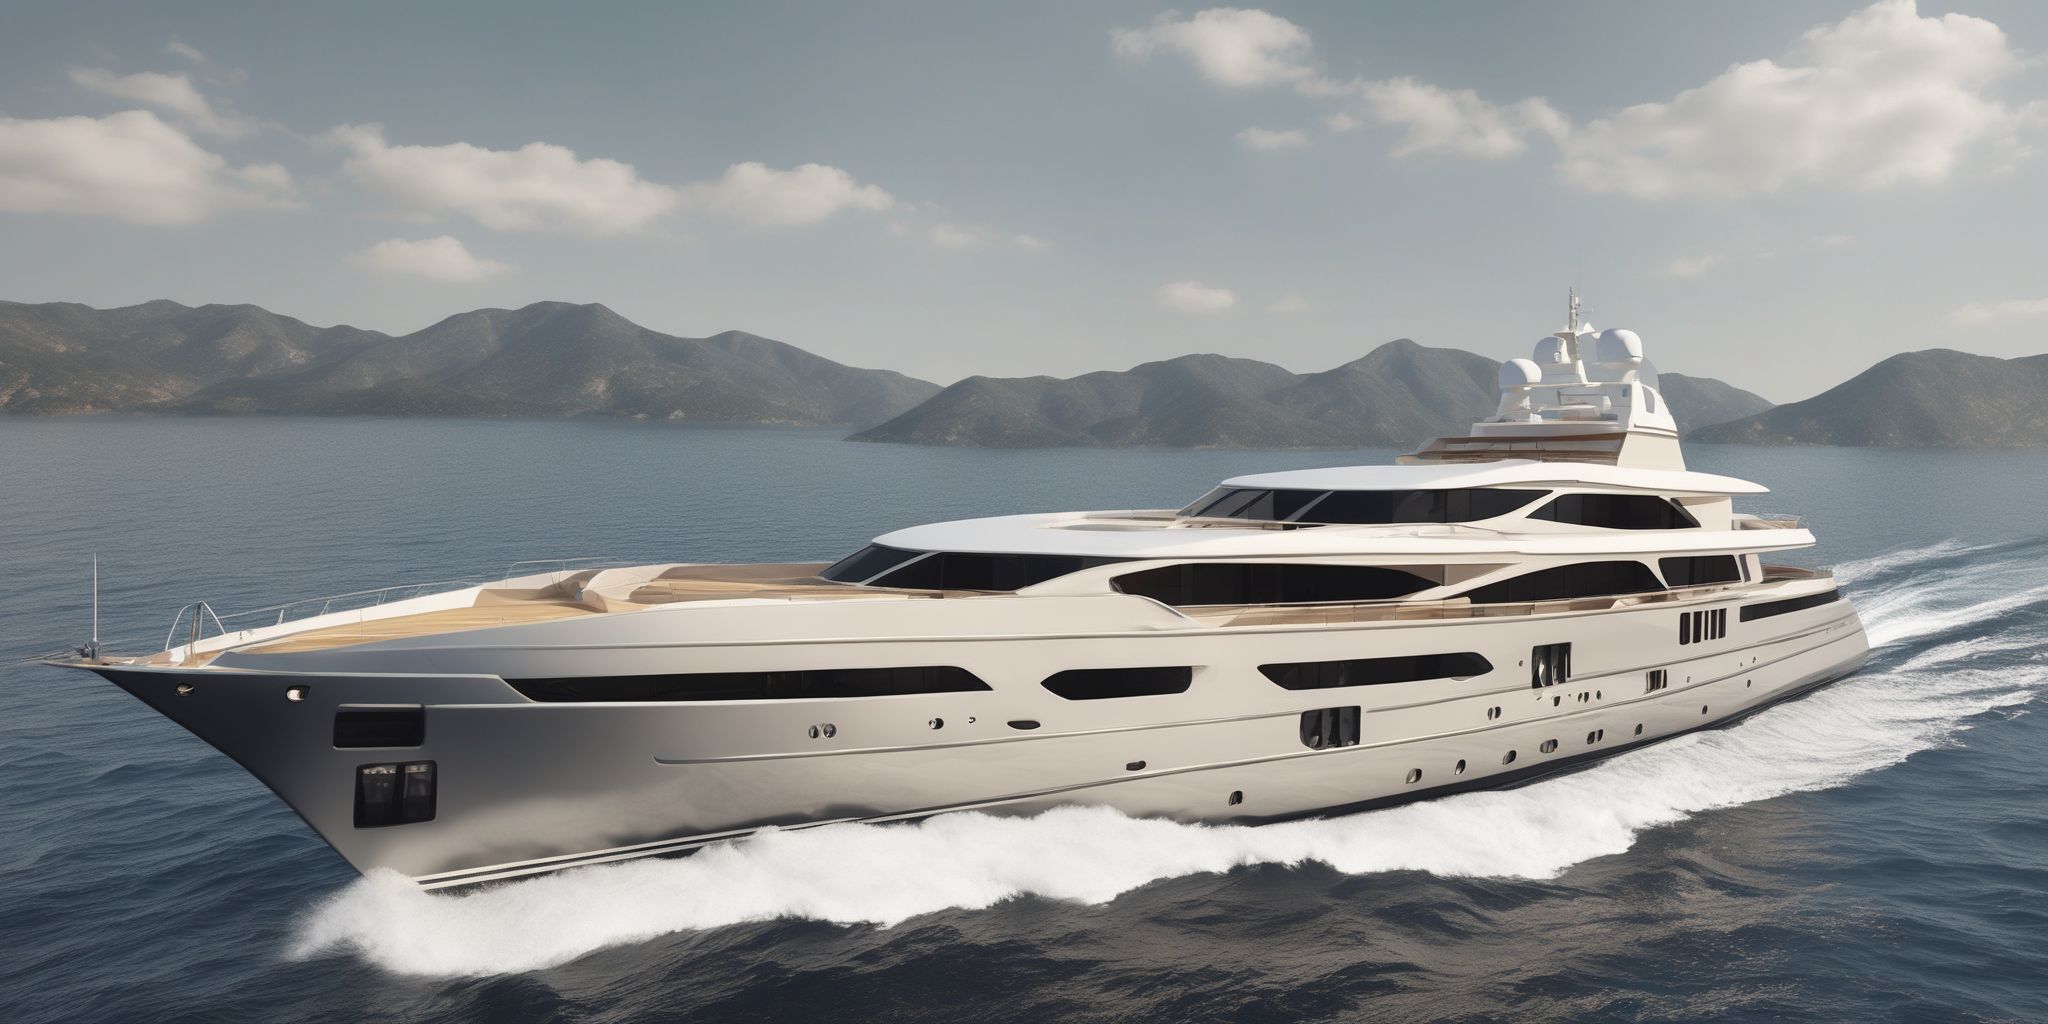 Credit yacht  in realistic, photographic style